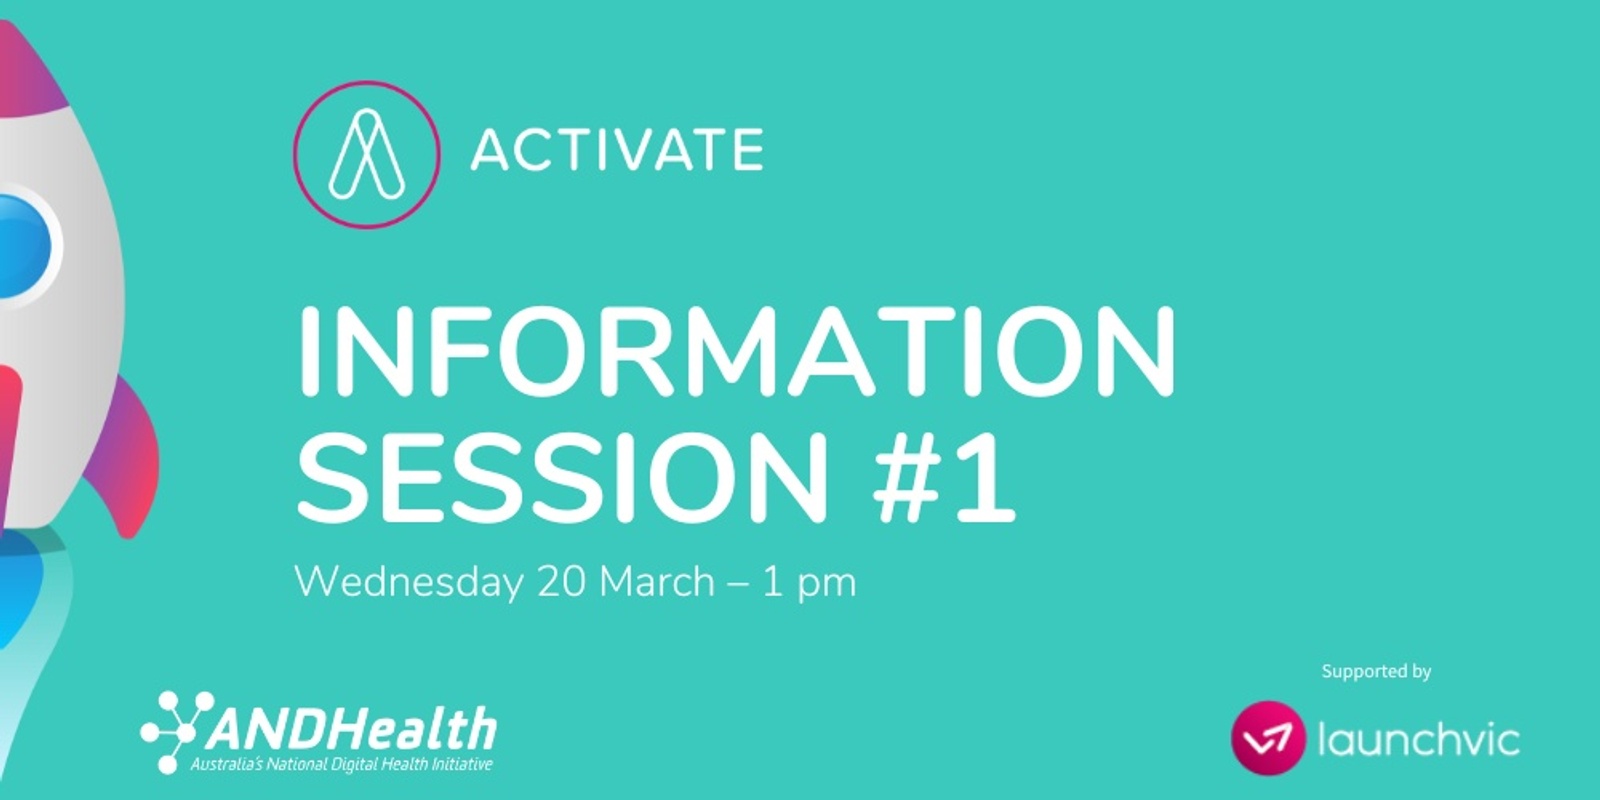 Banner image for ANDHealth ACTIVATE Information Session for Applicants #1